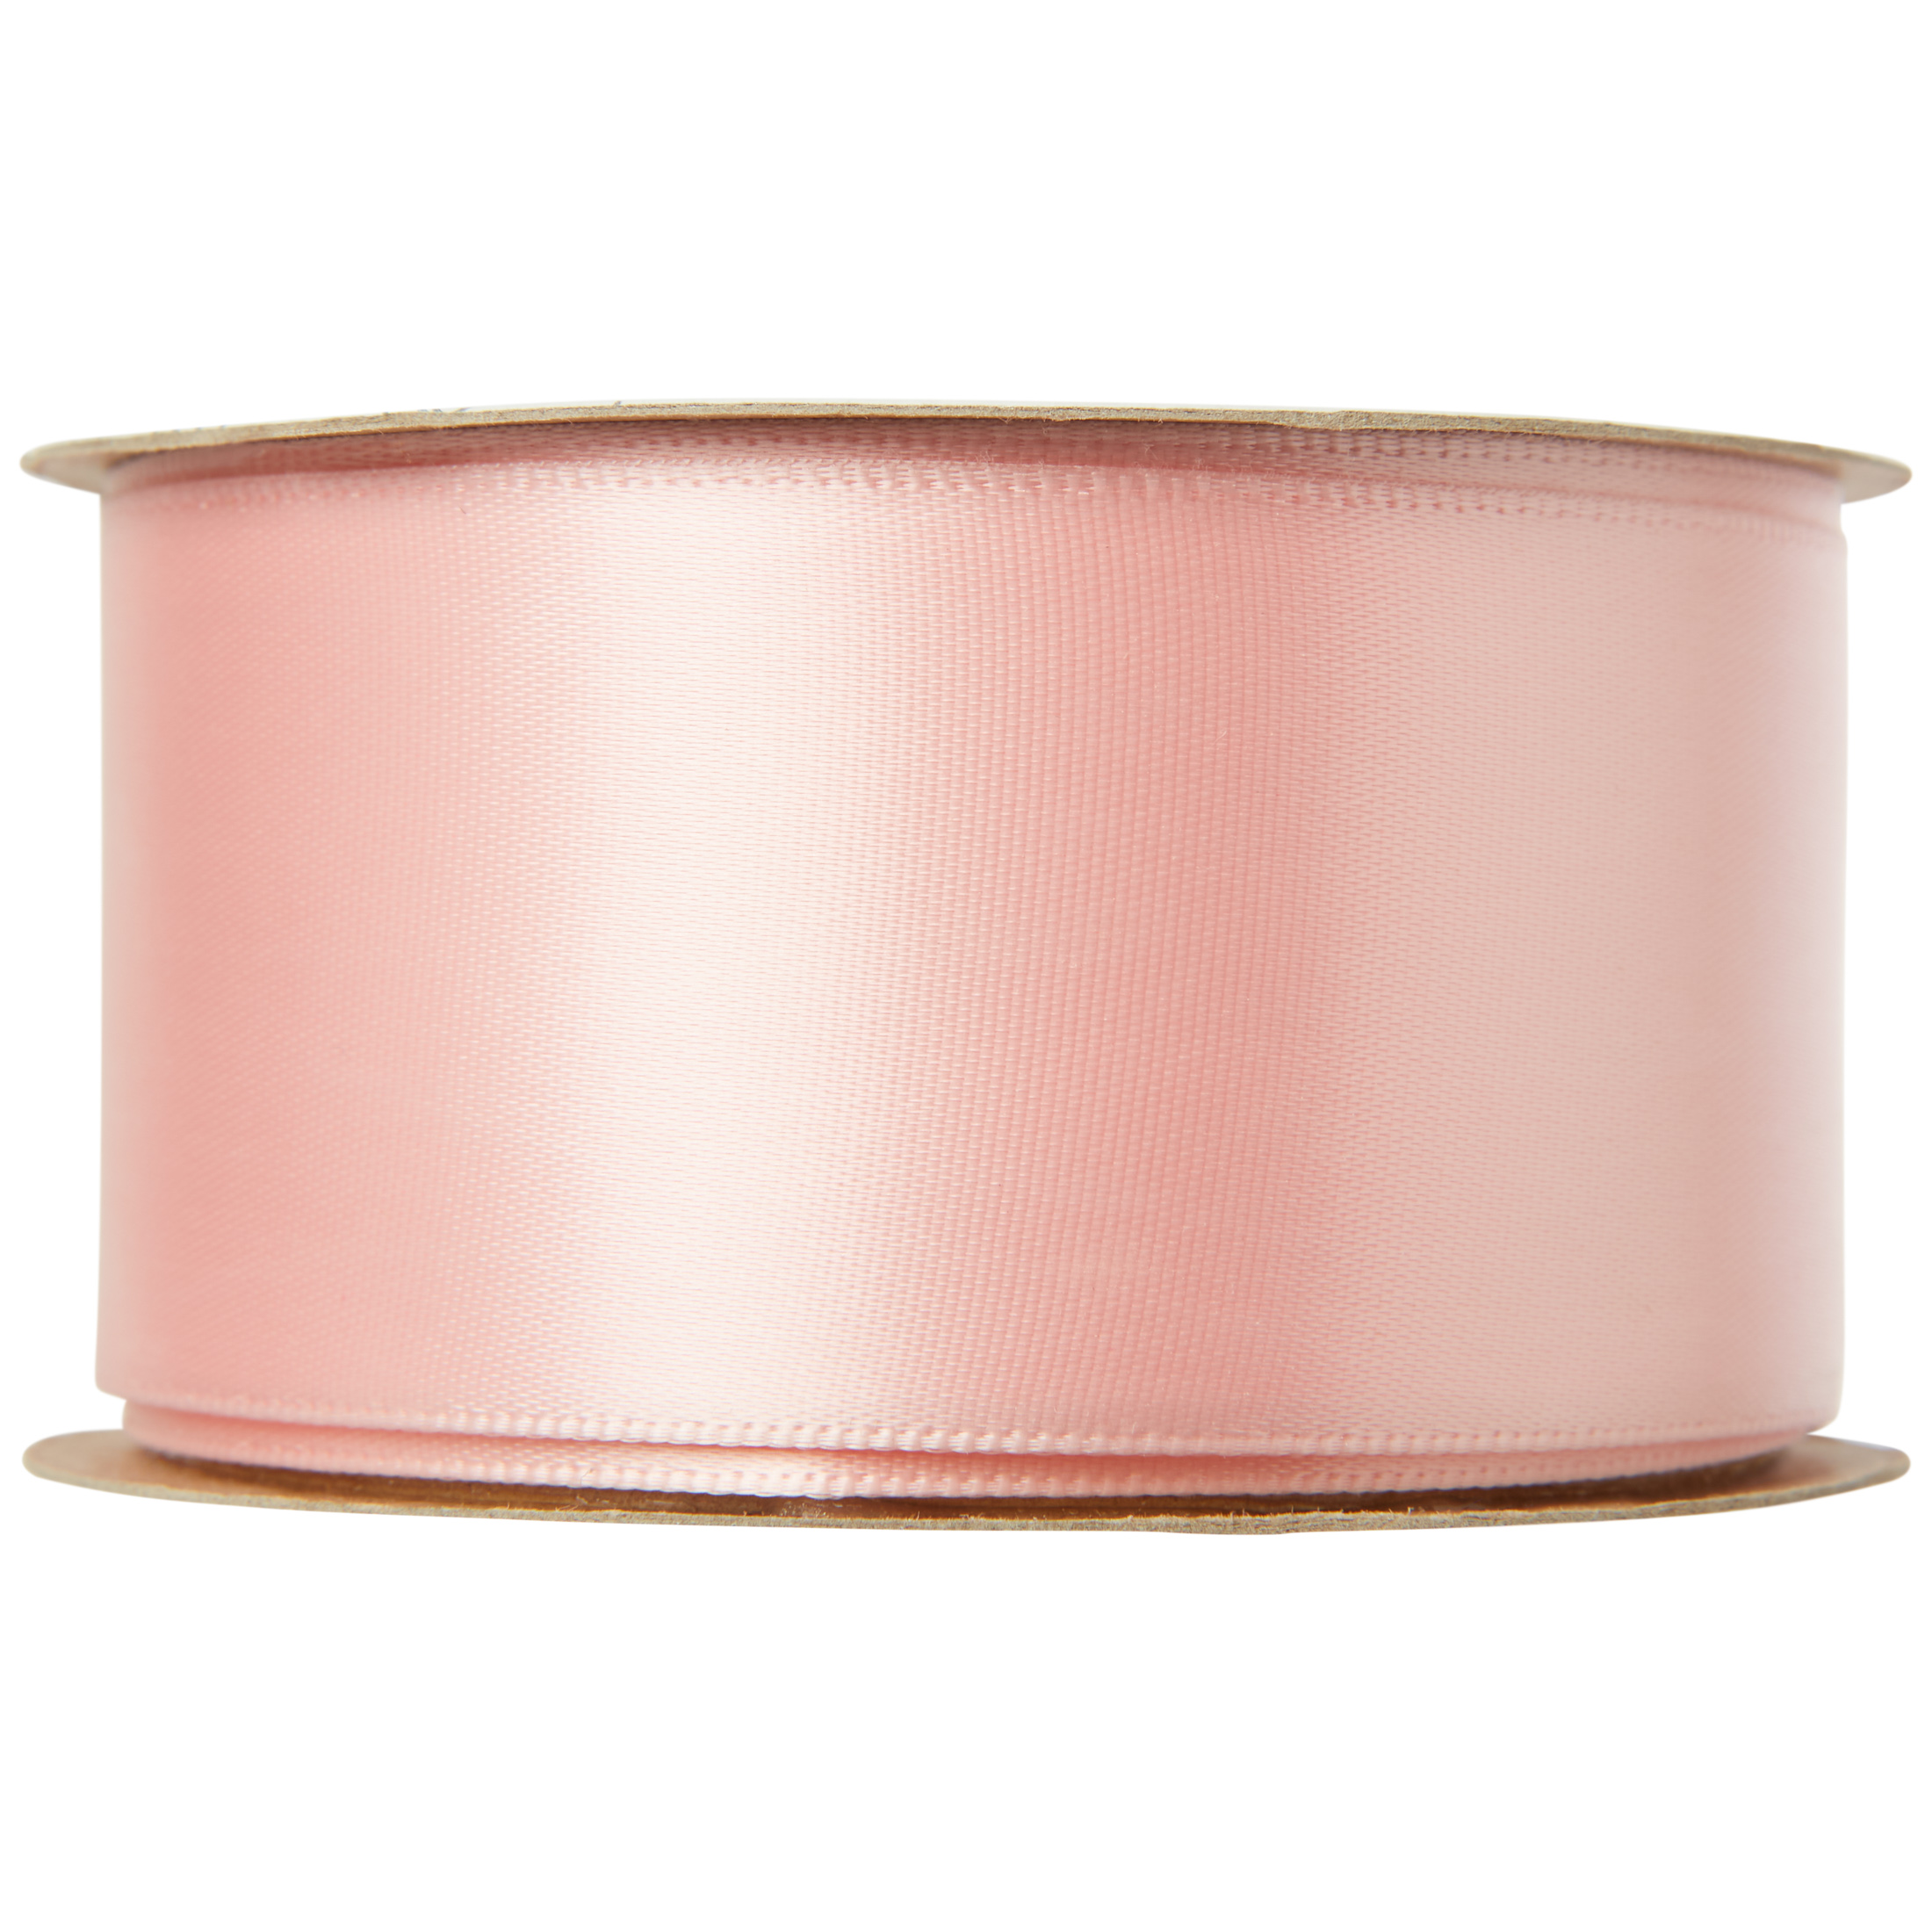 Offray Ribbon, Carnation Pink 1 1/2 inch Single Face Satin Polyester Ribbon, 12 feet - image 3 of 6